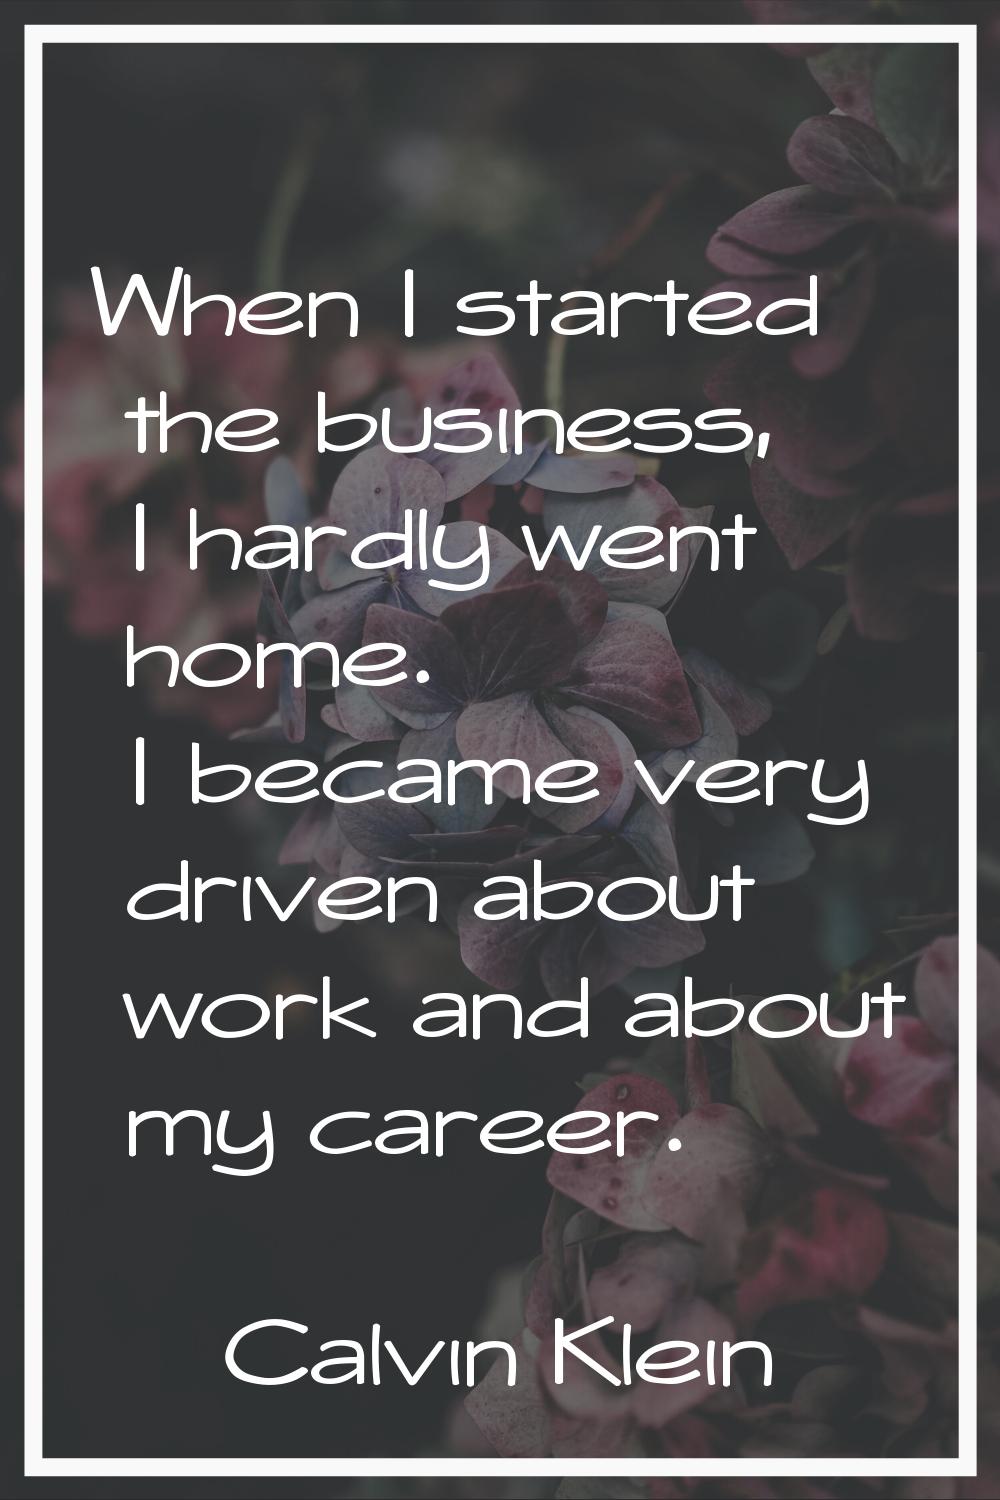 When I started the business, I hardly went home. I became very driven about work and about my caree